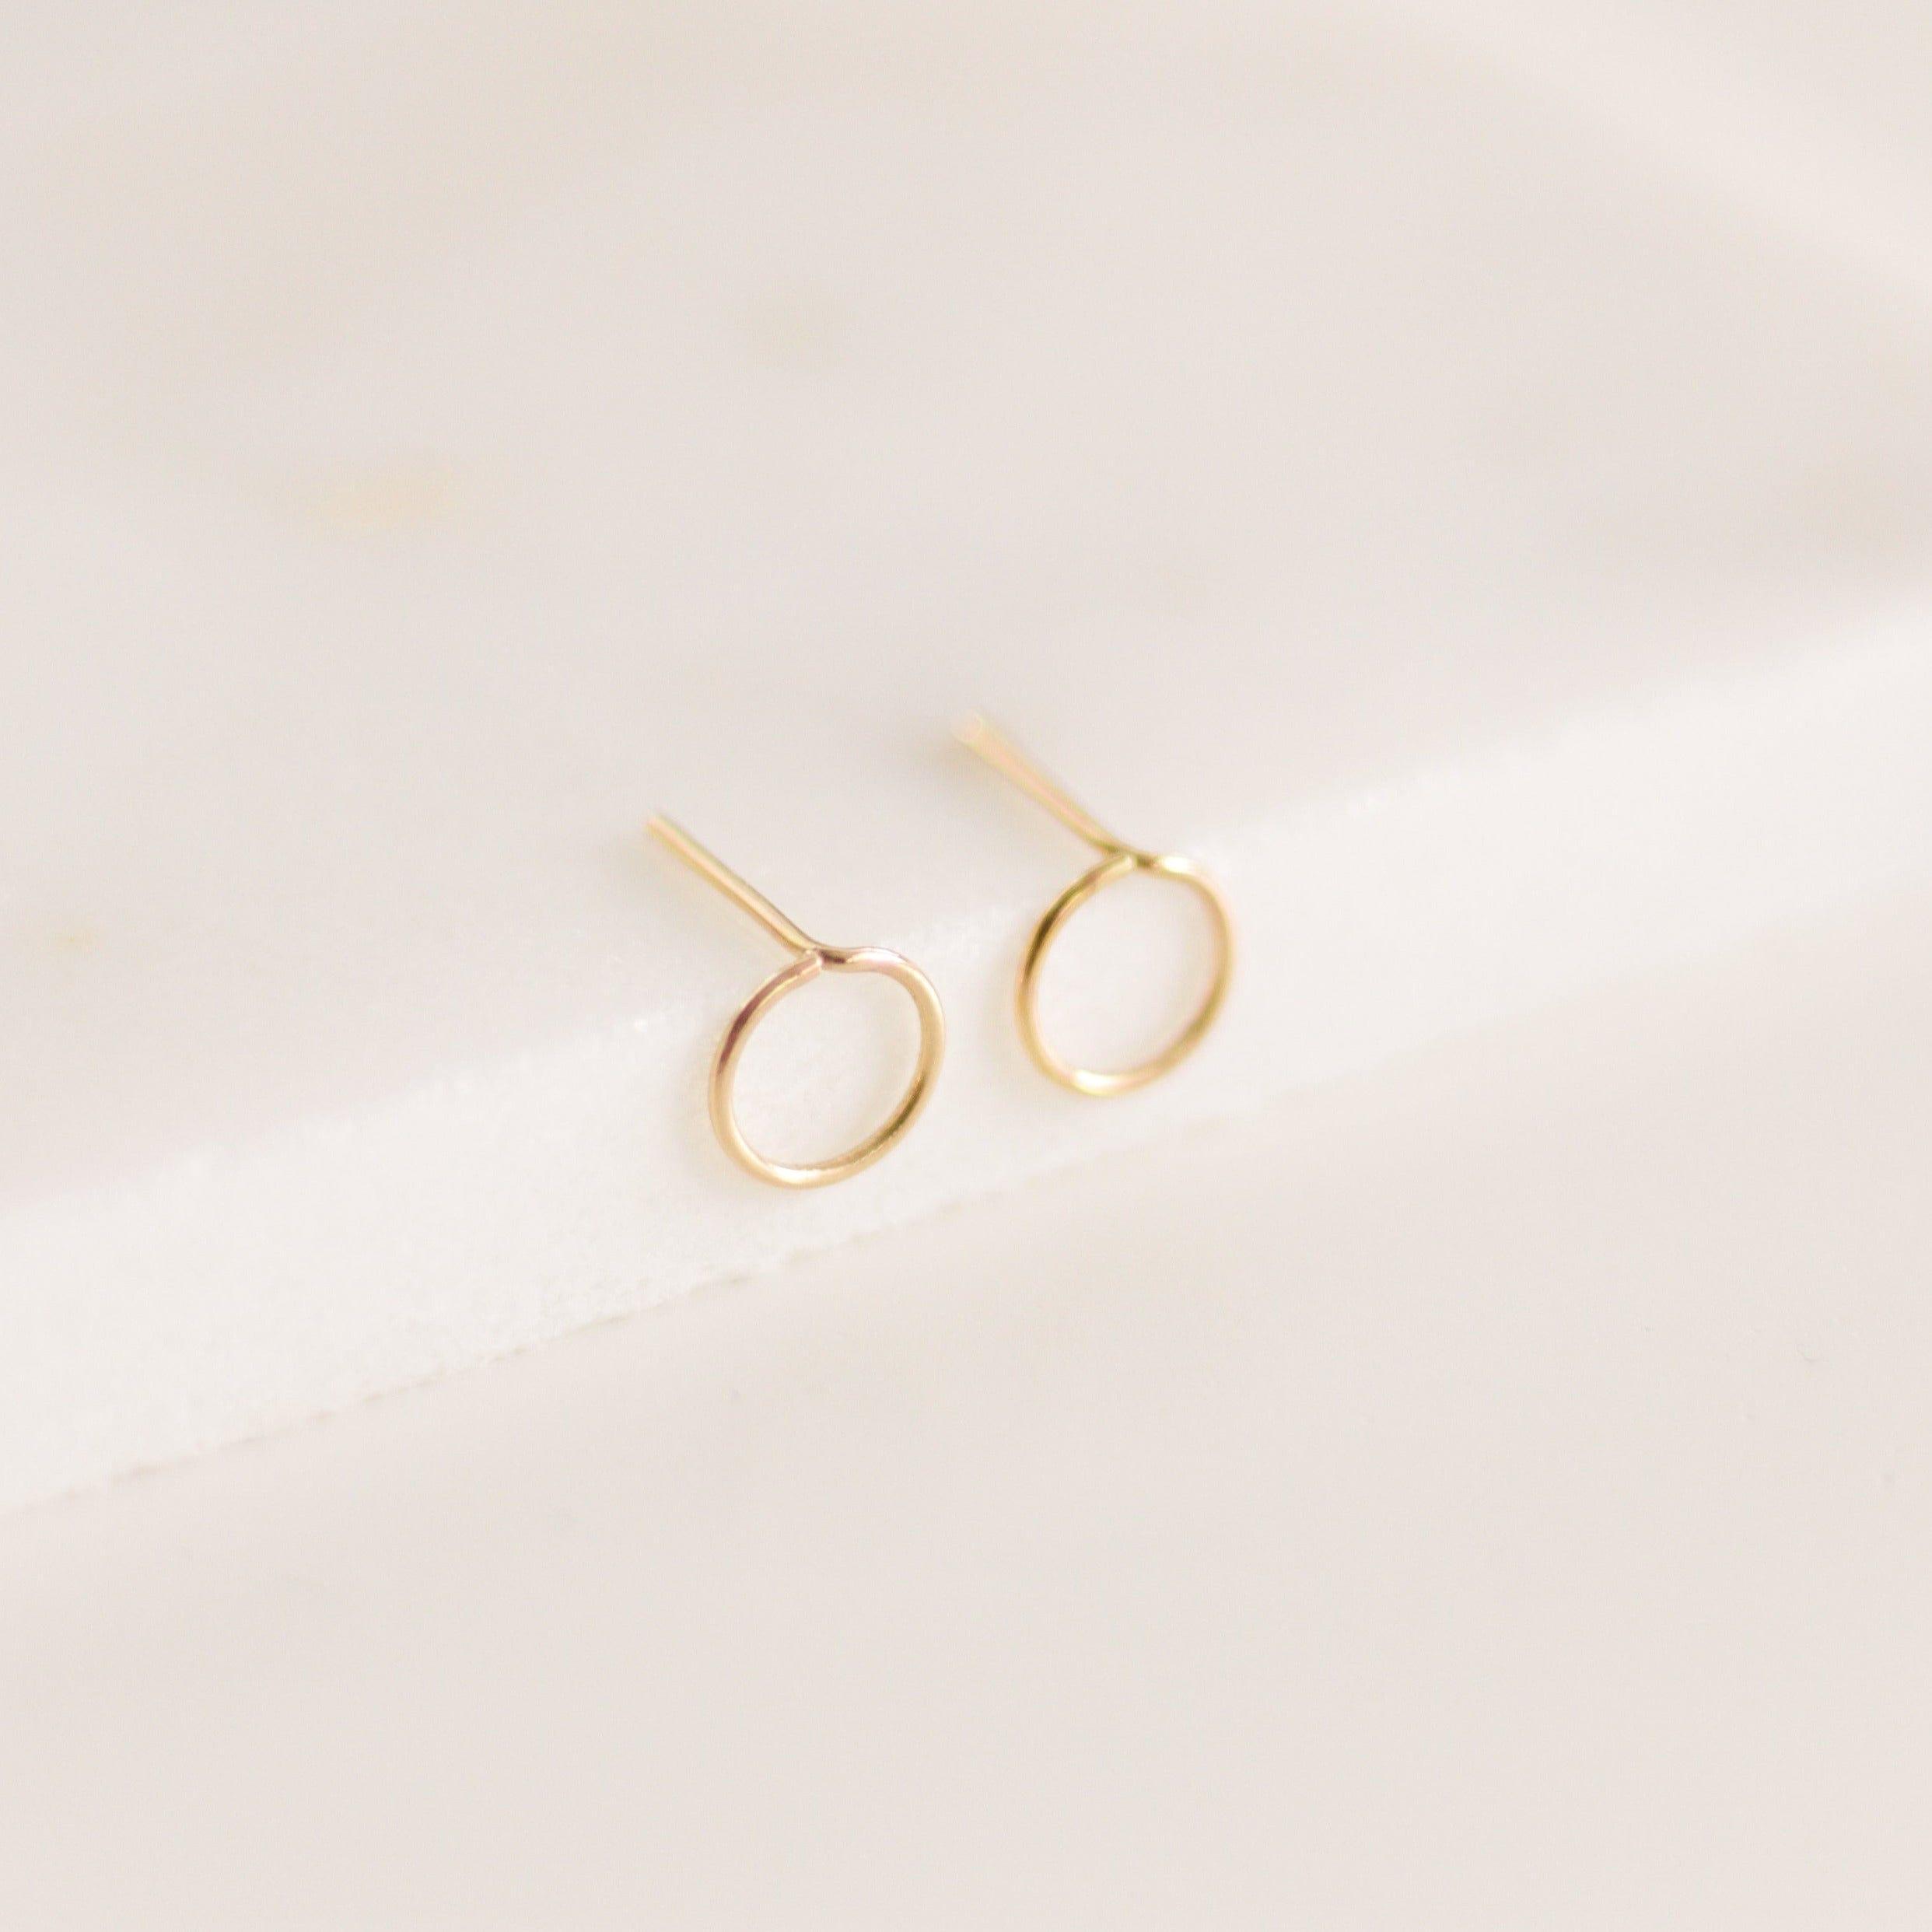 Large Circle Stud Earrings - Nolia Jewelry - Meaningful + Sustainably Handcrafted Jewelry